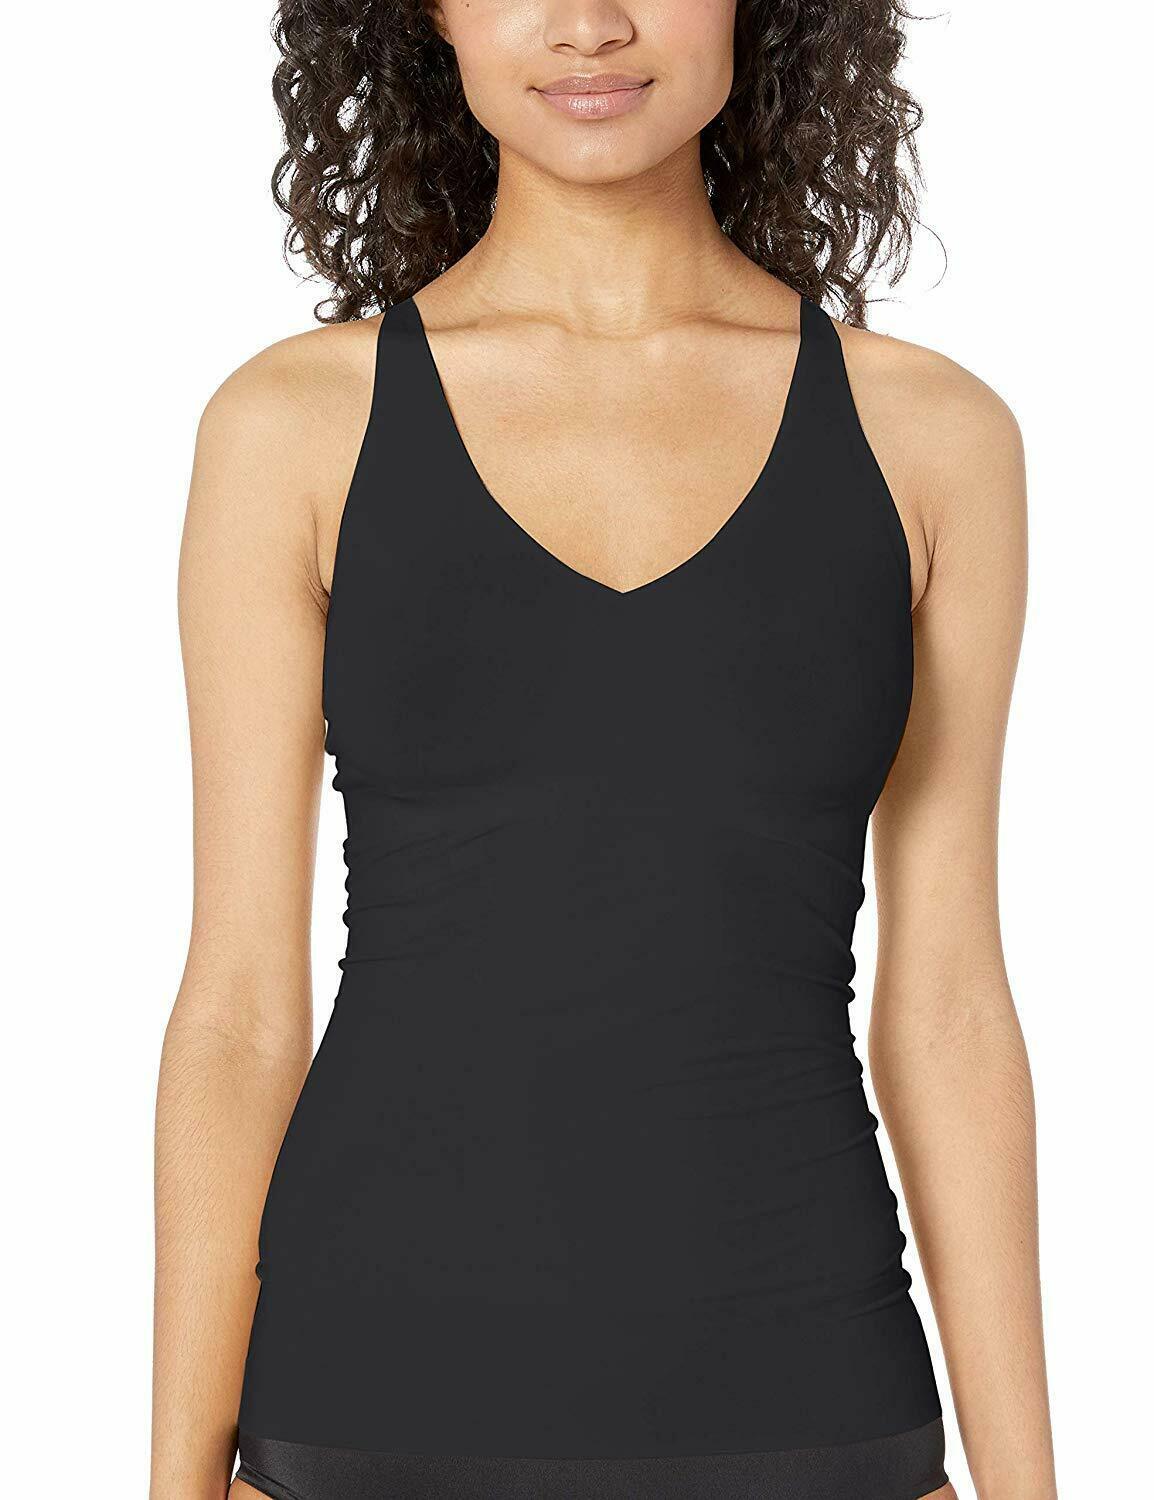 Yummie BLACK Smooth Solutions Shapewear Camisole with Molded Bust, US ...